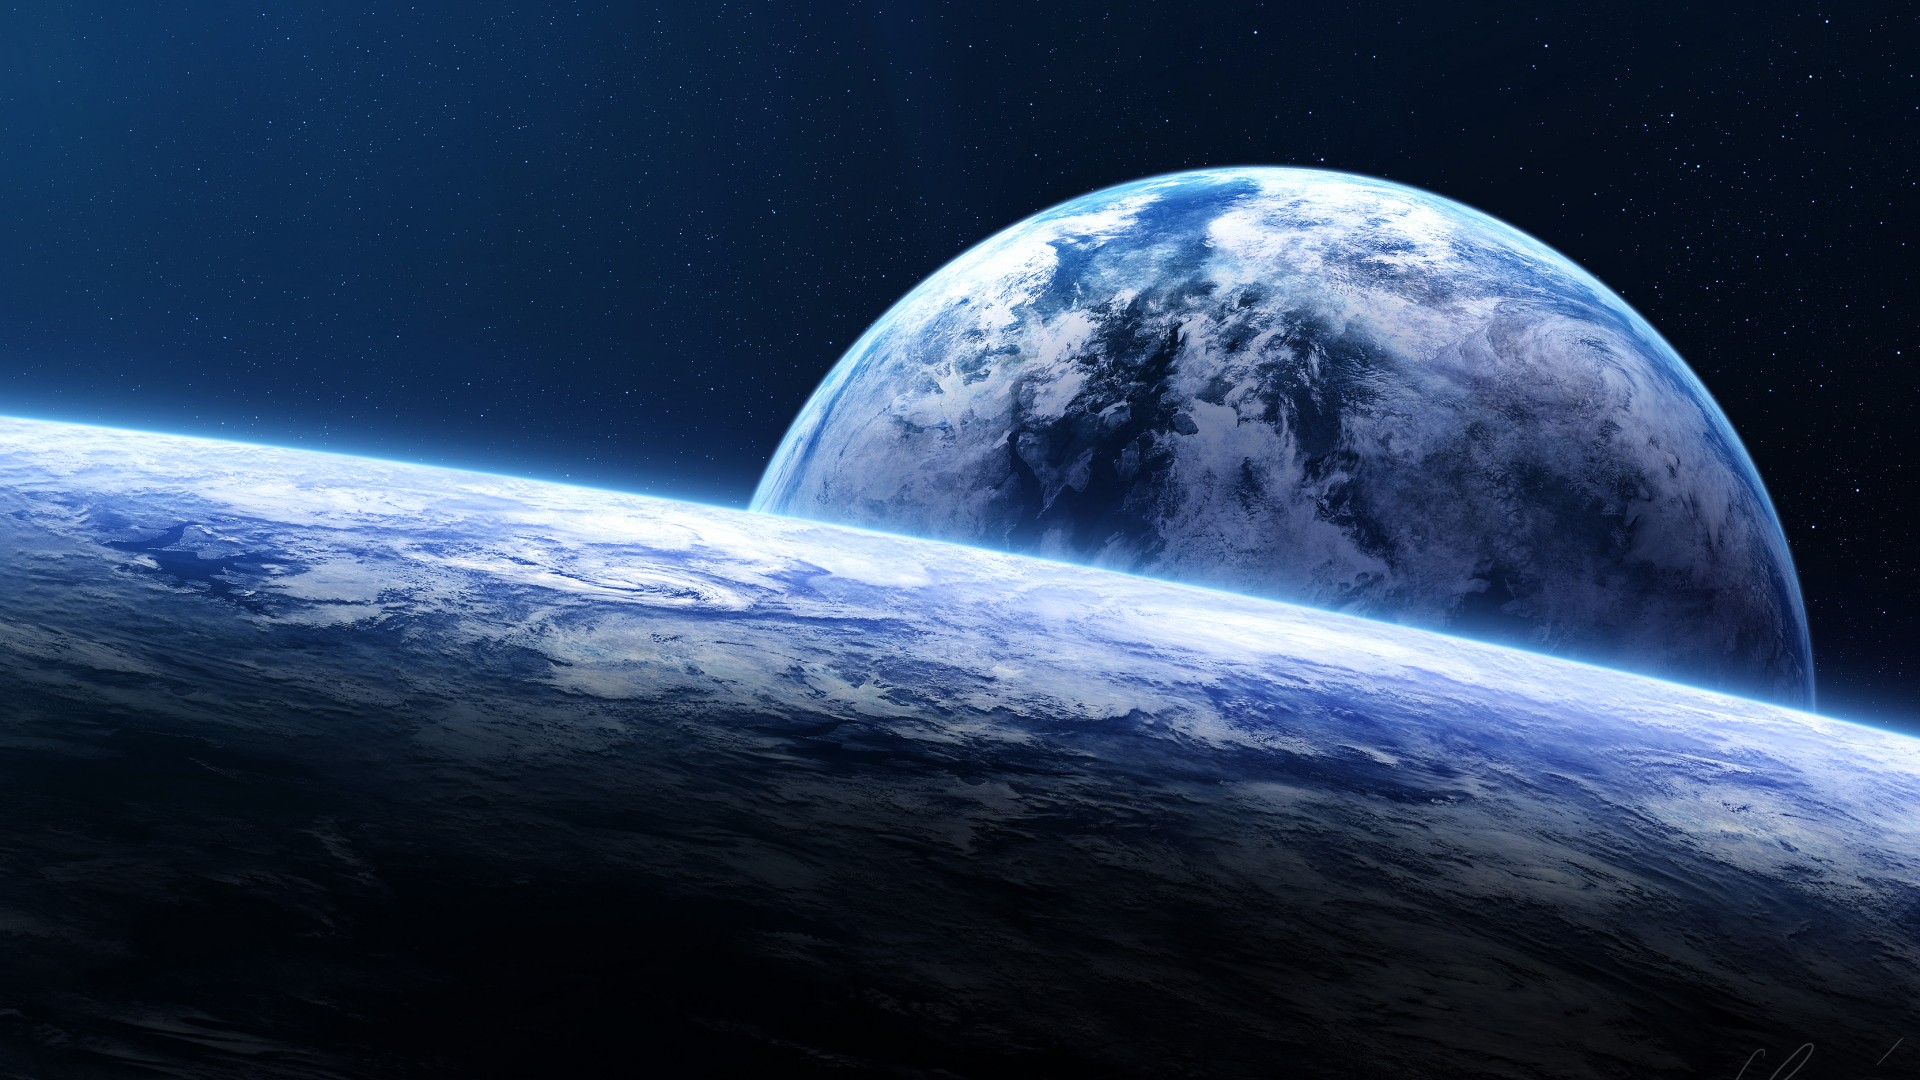 planetscape, Space, Sci fi, Planets, Landscapes, Moon, Stars Wallpaper